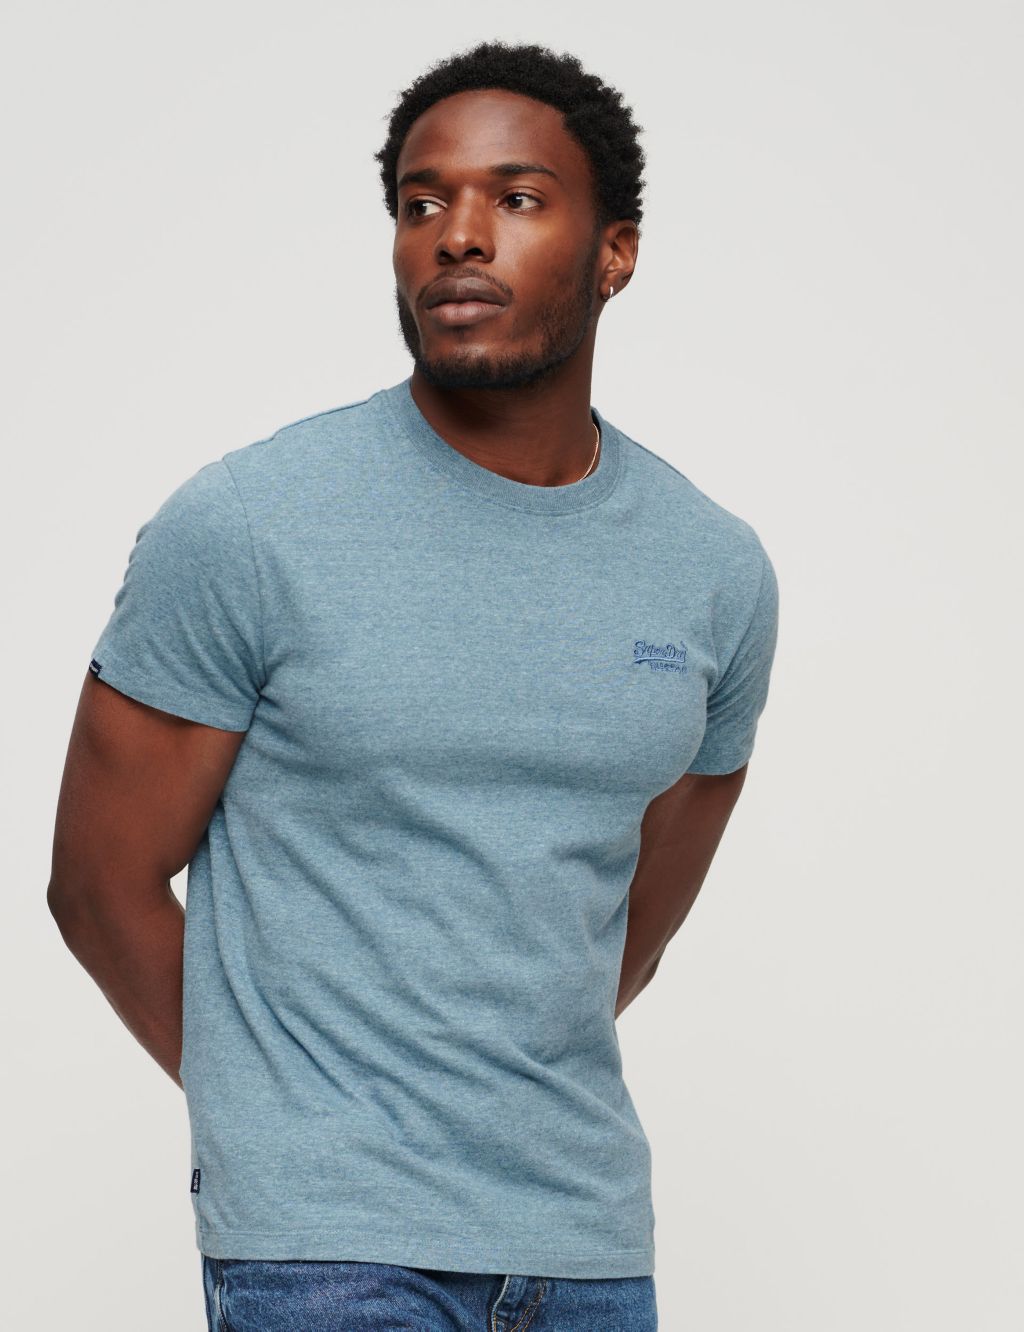 Relaxed Fit Organic Cotton Textured T-Shirt